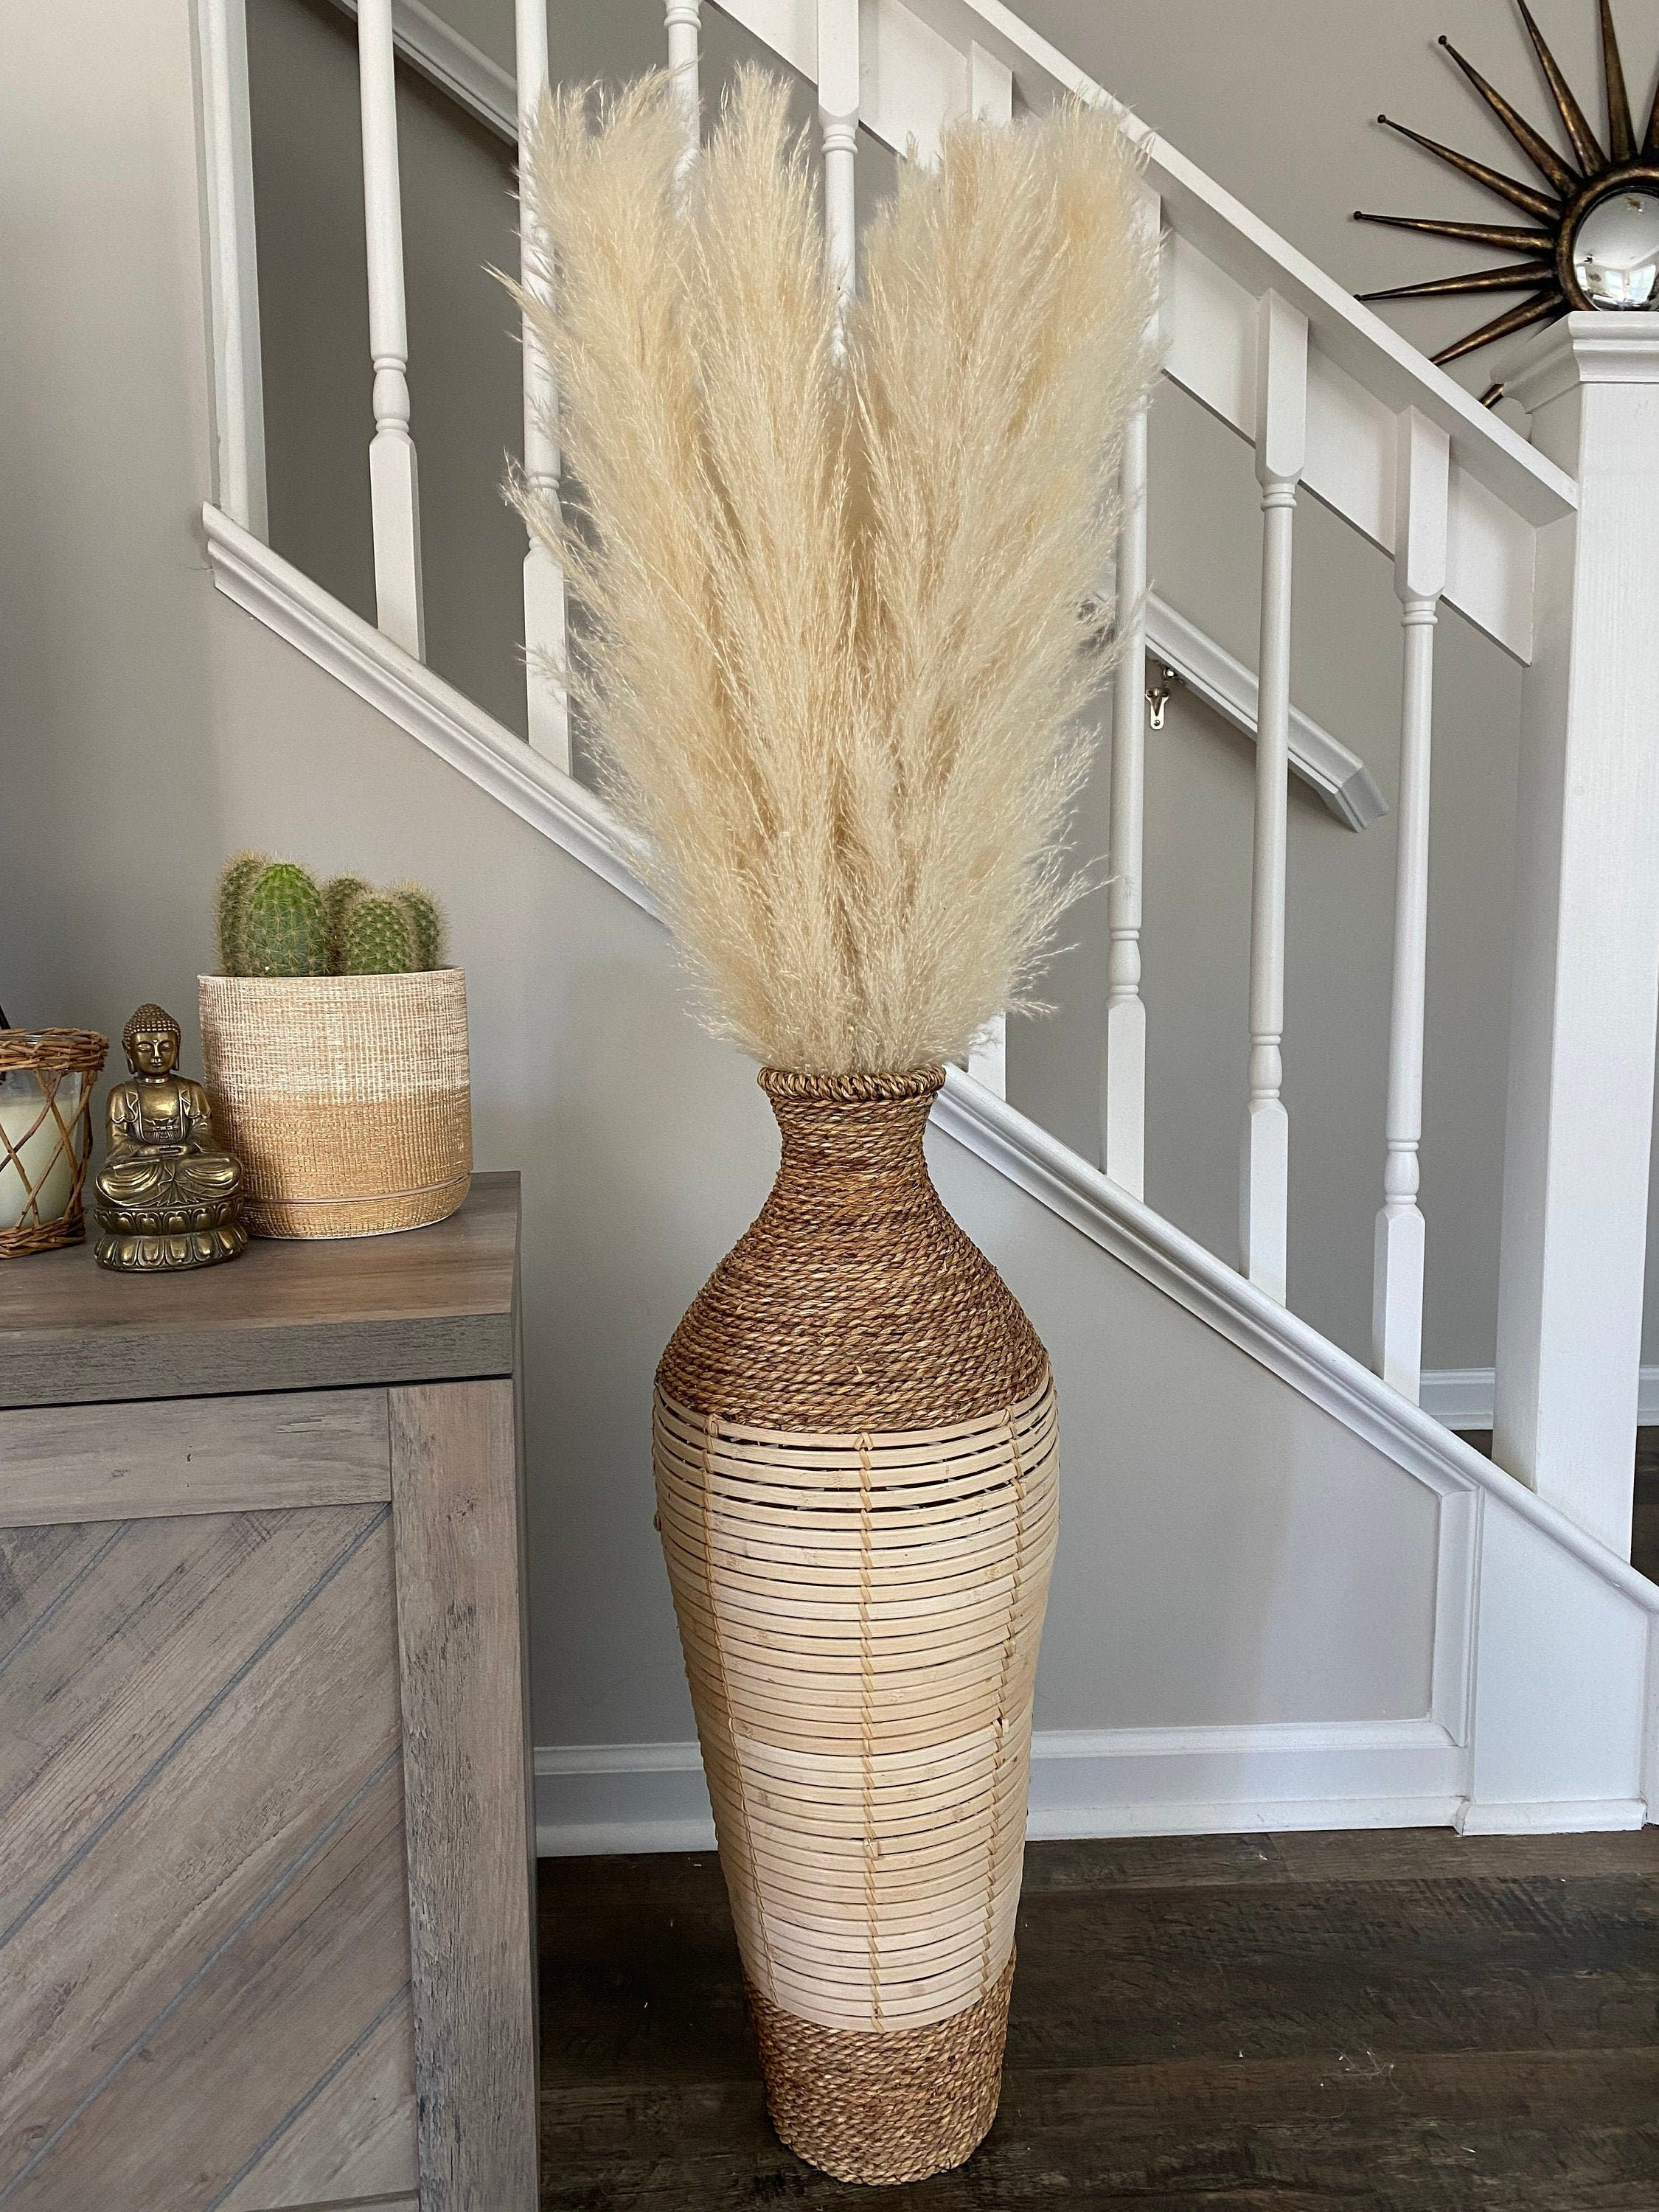 20 Stems Boho Style 24 INCHES LONG Natural Dried Pampas Grass FREE Shipping